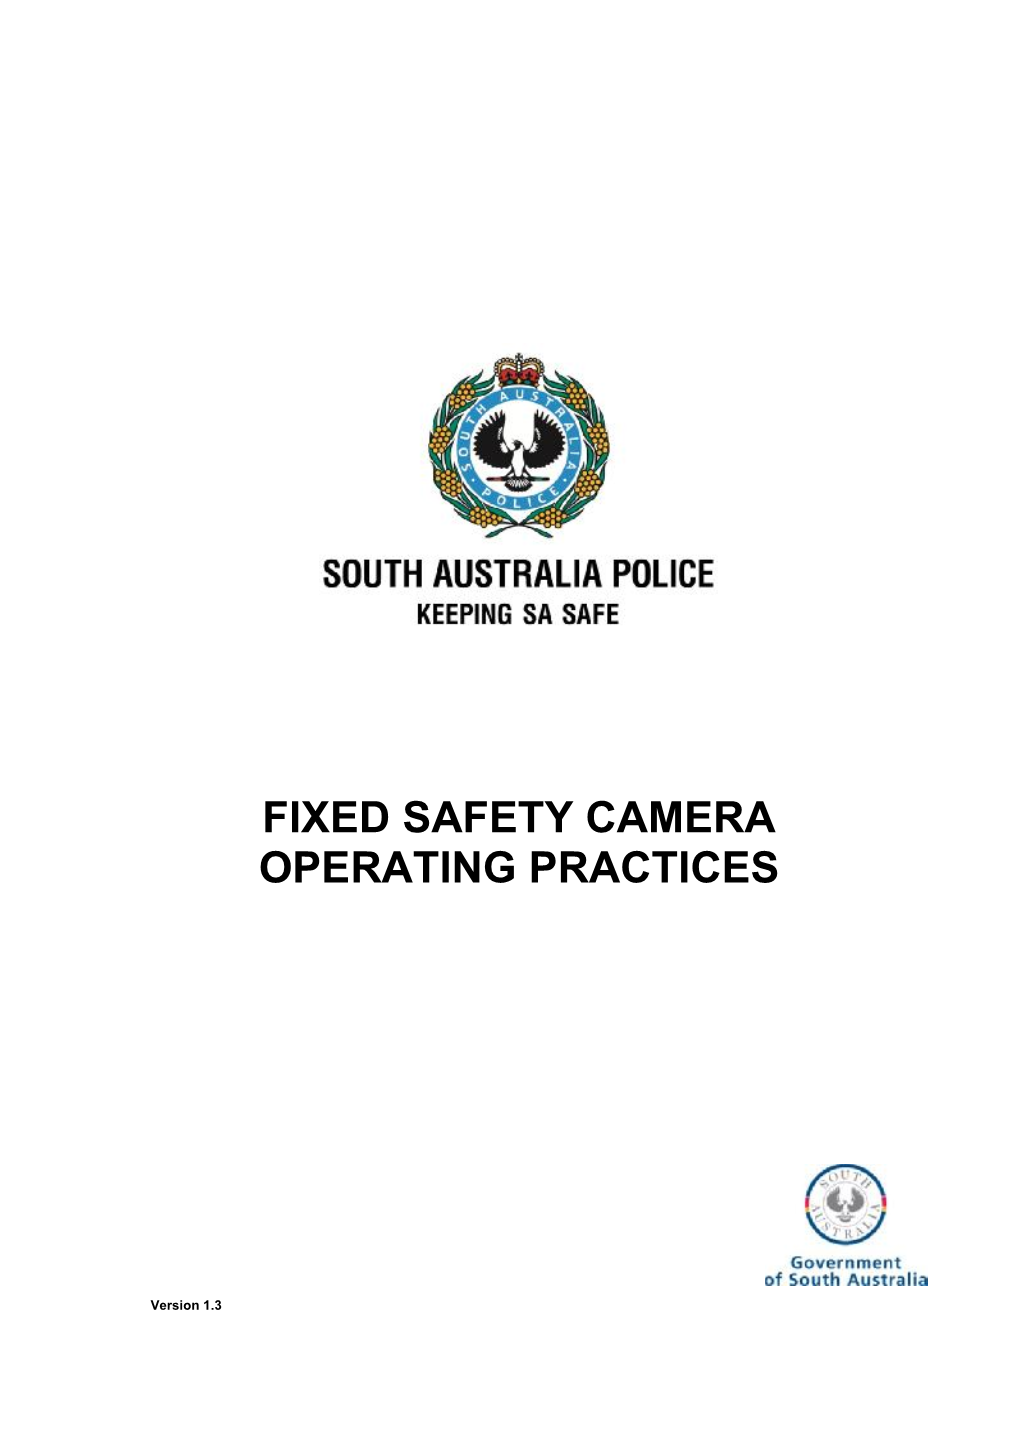 Fixed Safety Camera Operating Practices